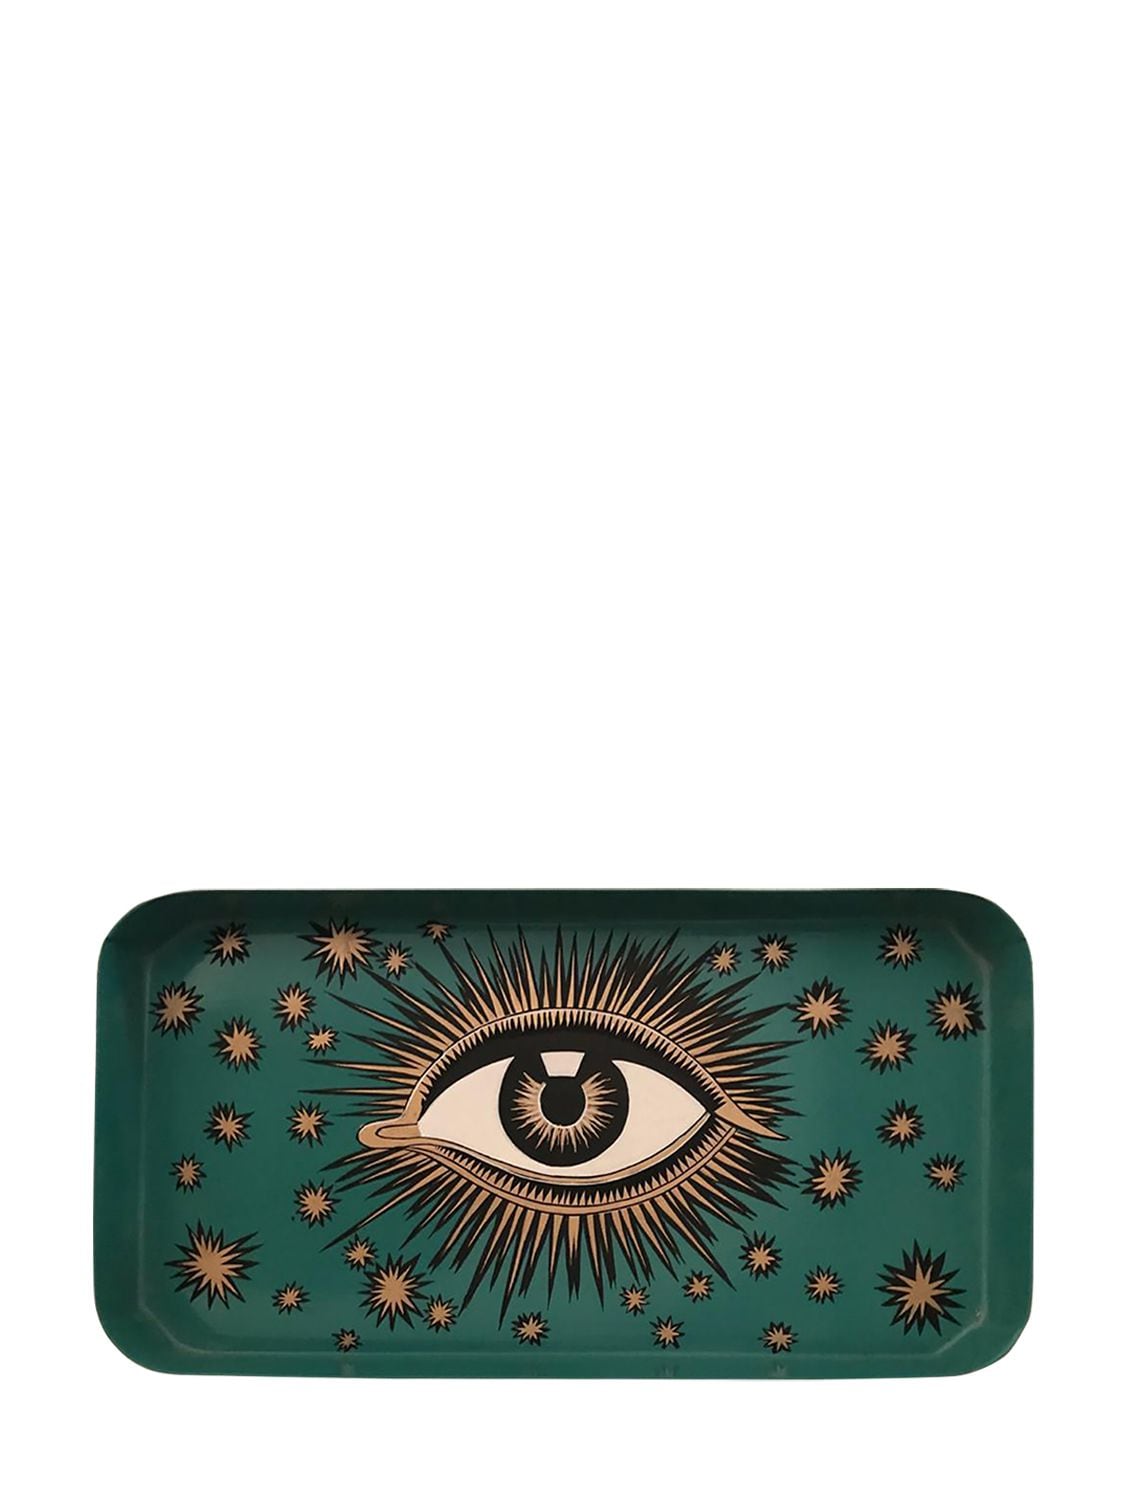 Les Ottomans Eye Hand-painted Iron Tray In Green